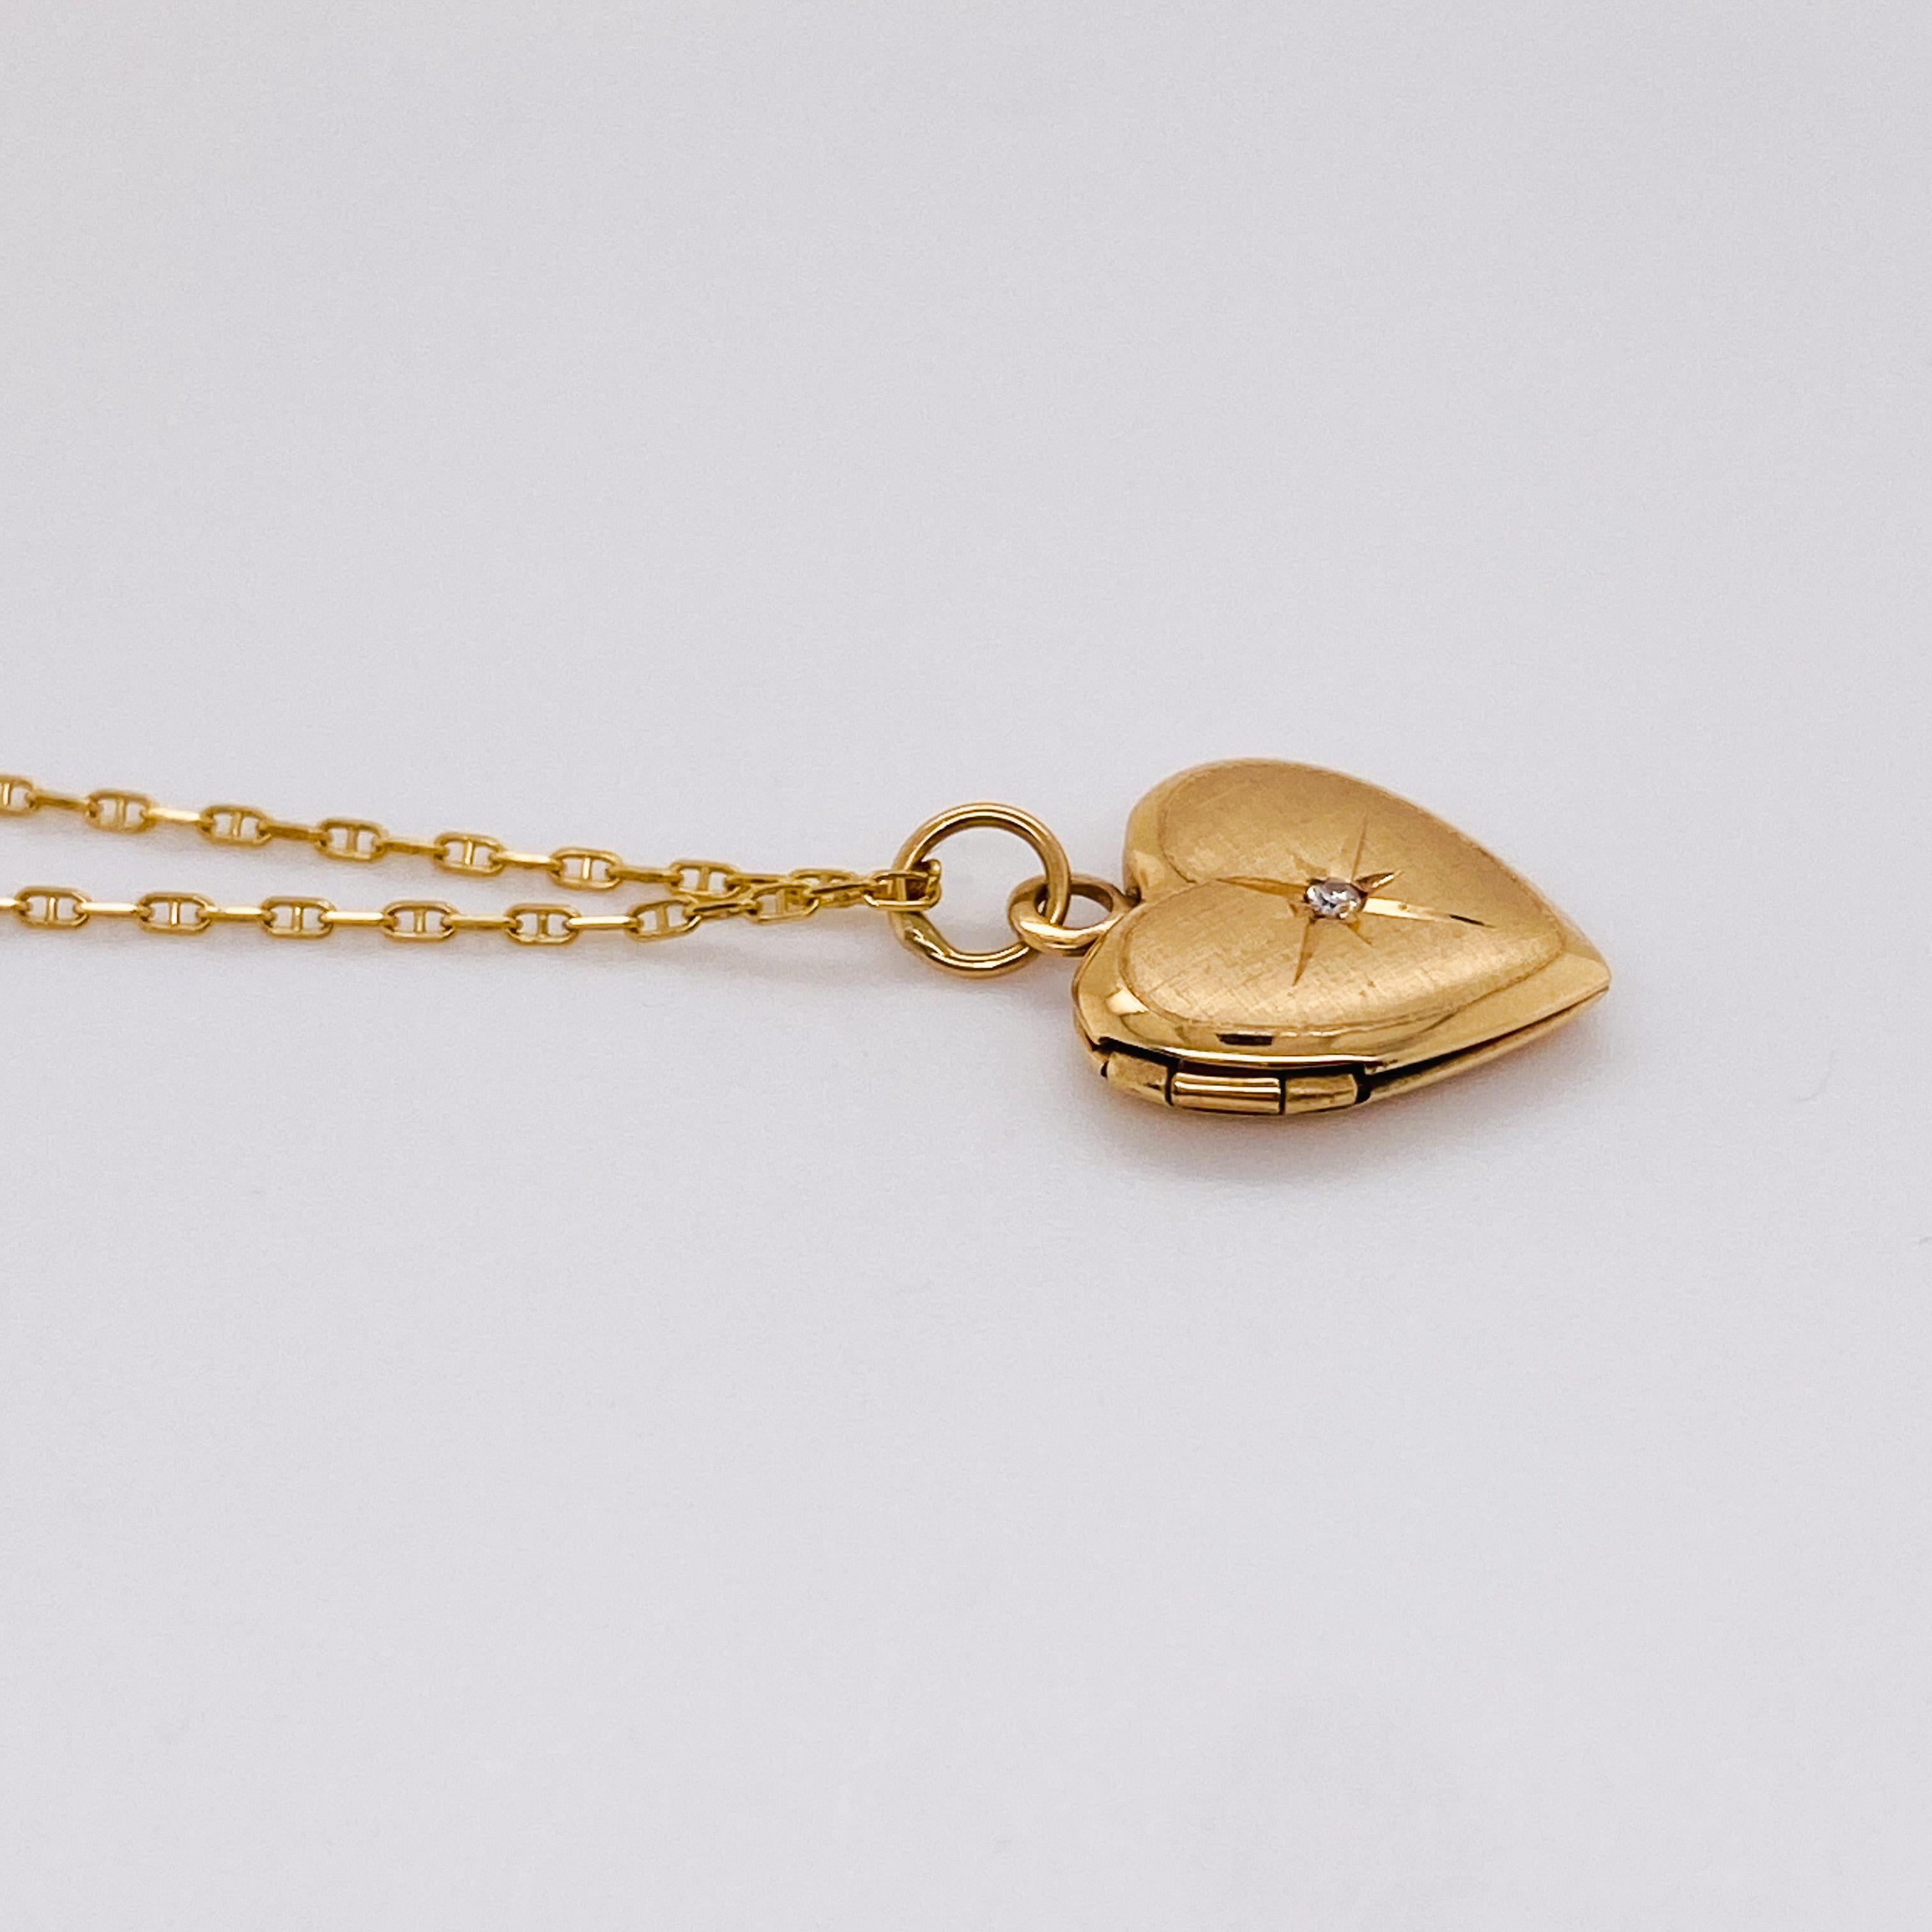 Retro Vintage Heart Diamond Locket Necklace in 14K Yellow Gold with Anchor Link Chain For Sale